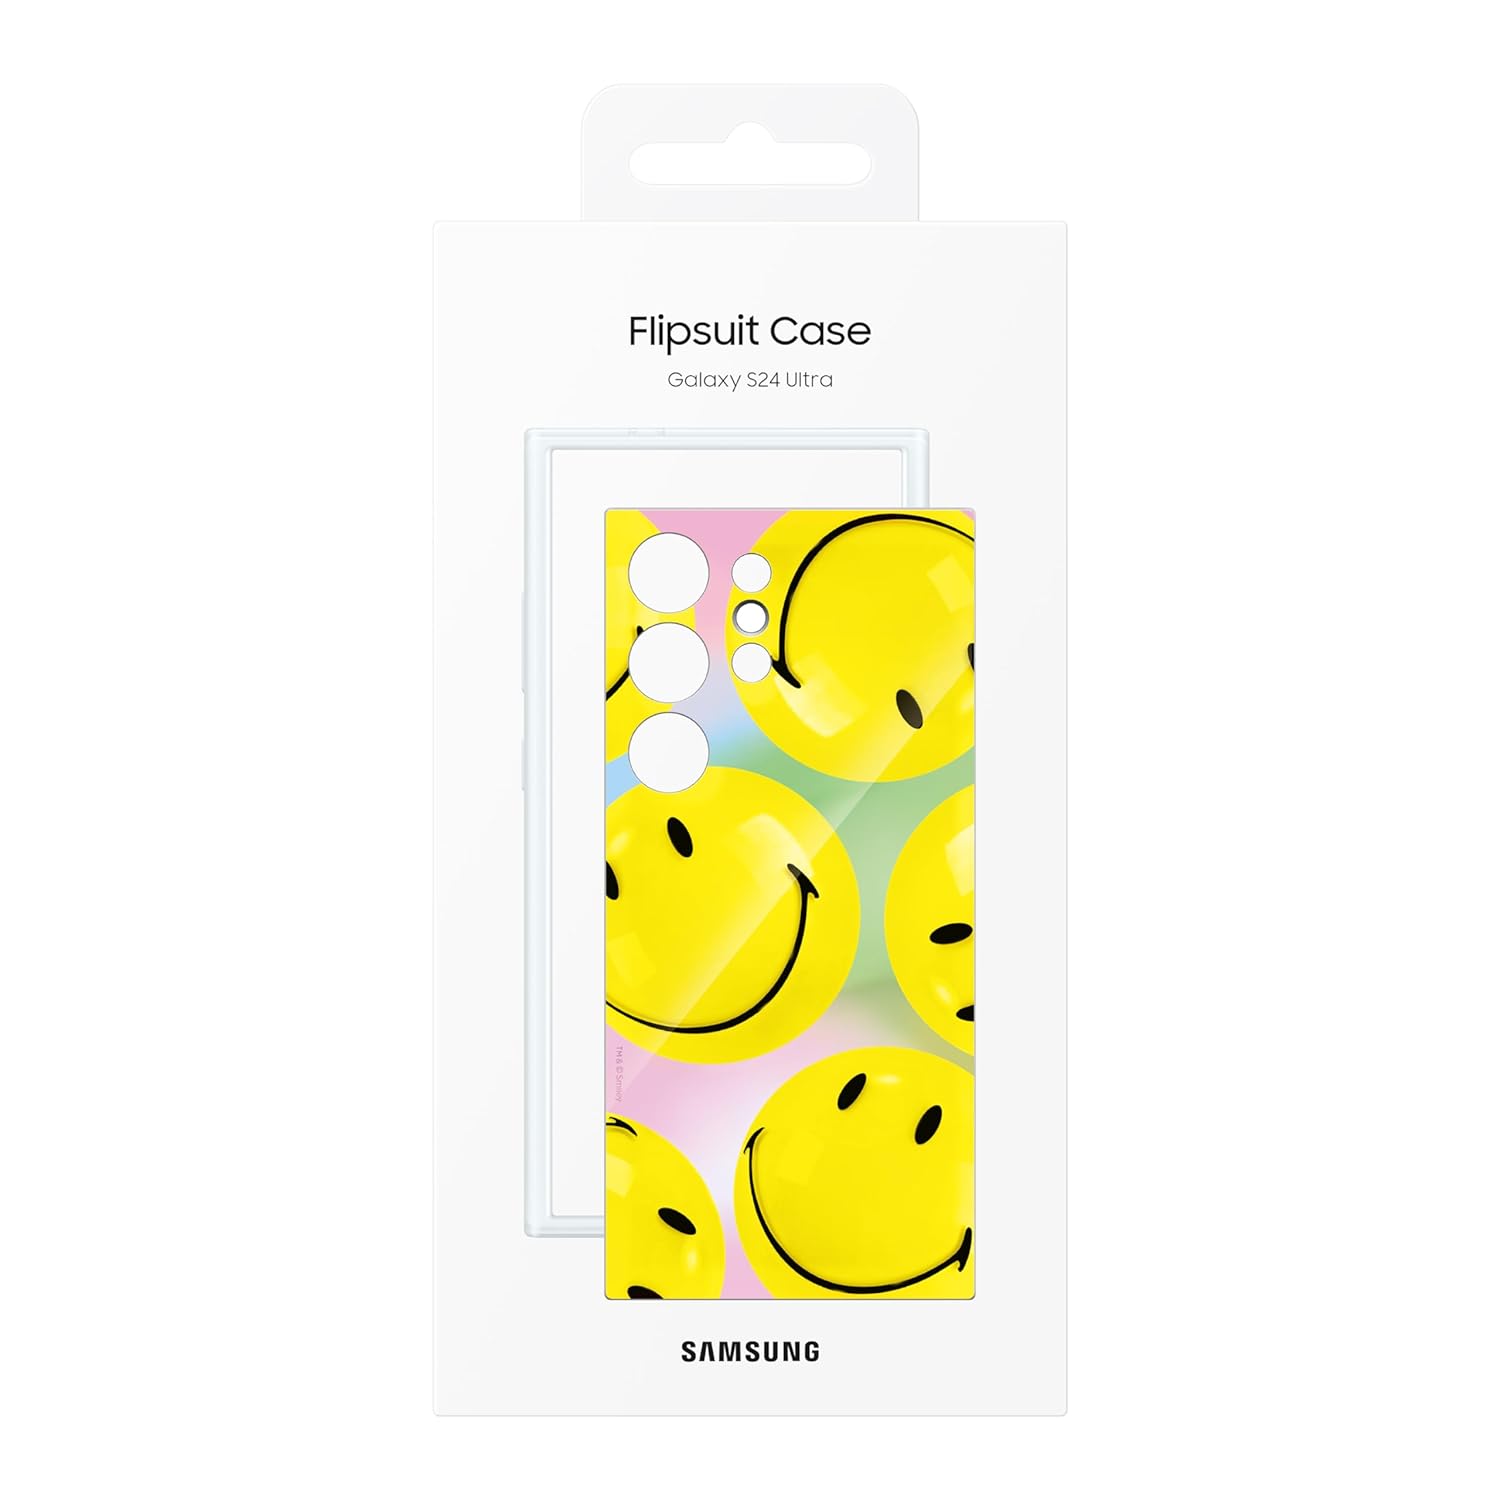 SAMSUNG Galaxy S24 Ultra FlipSuit Phone Case, Included Interactive Card Syncs with Screen, Customize for Different Display Designs, US Version, EF-MS928CYEGUS, Yellow